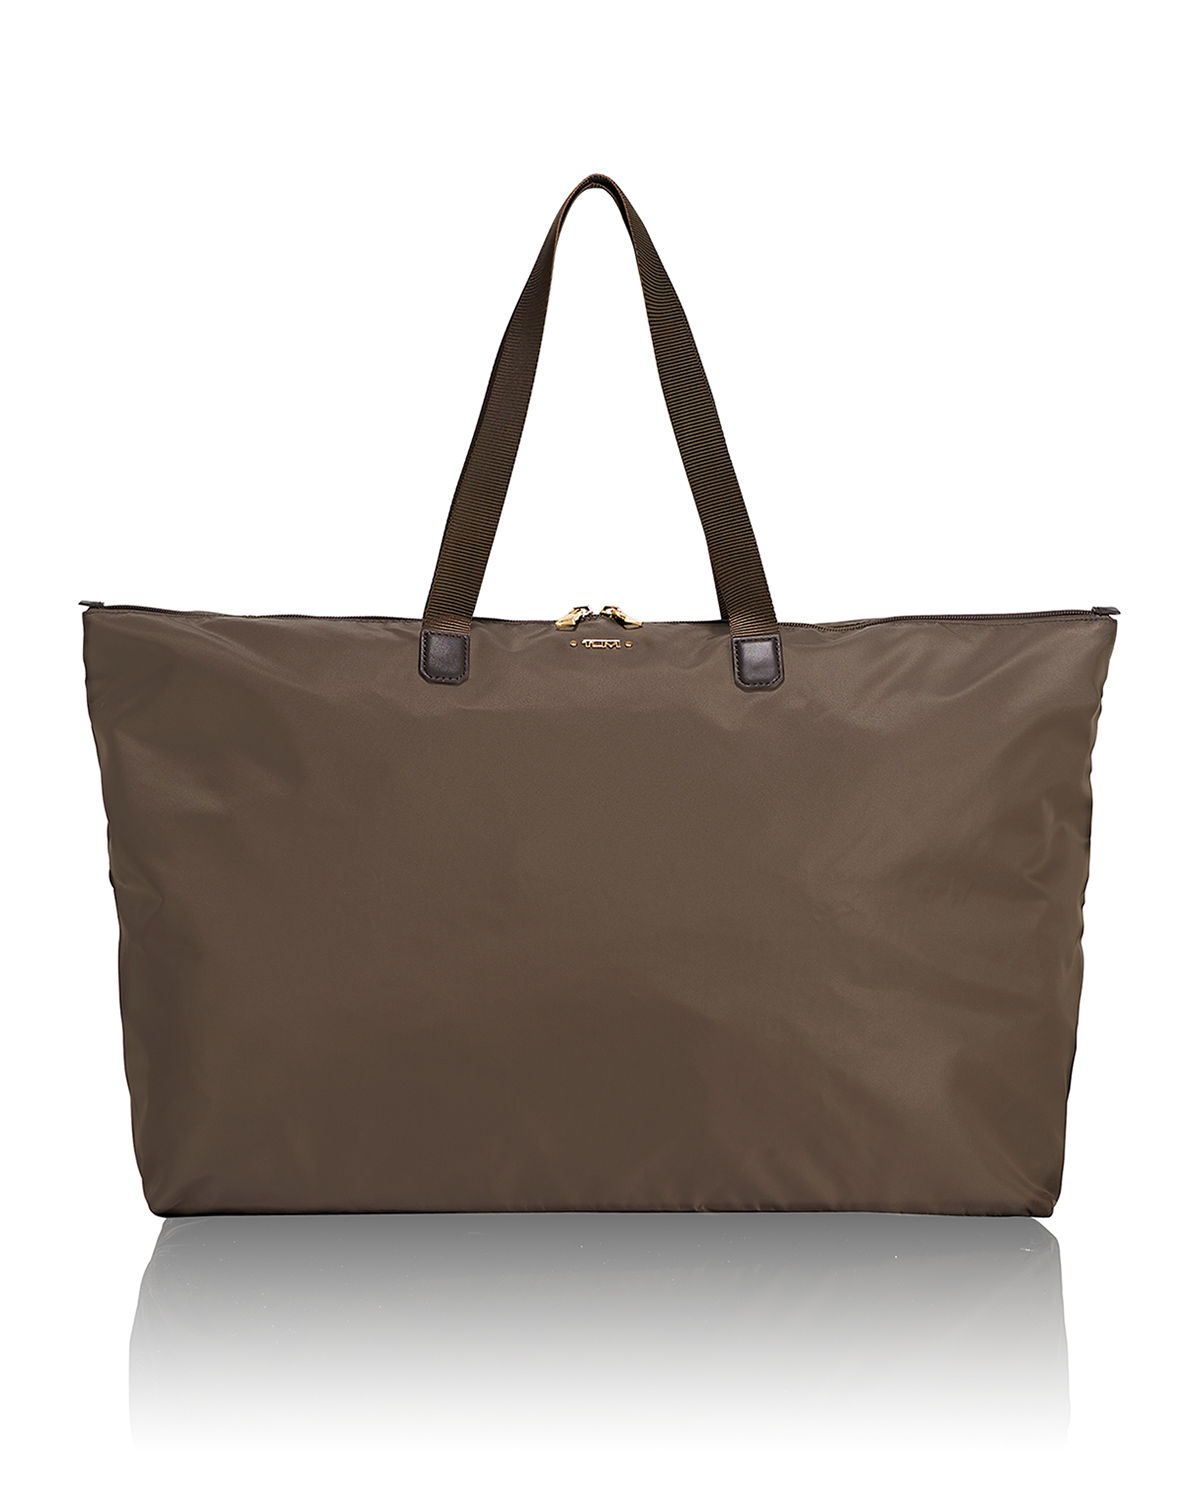 Brown Just In Case tote, $79 at Neiman Marcus